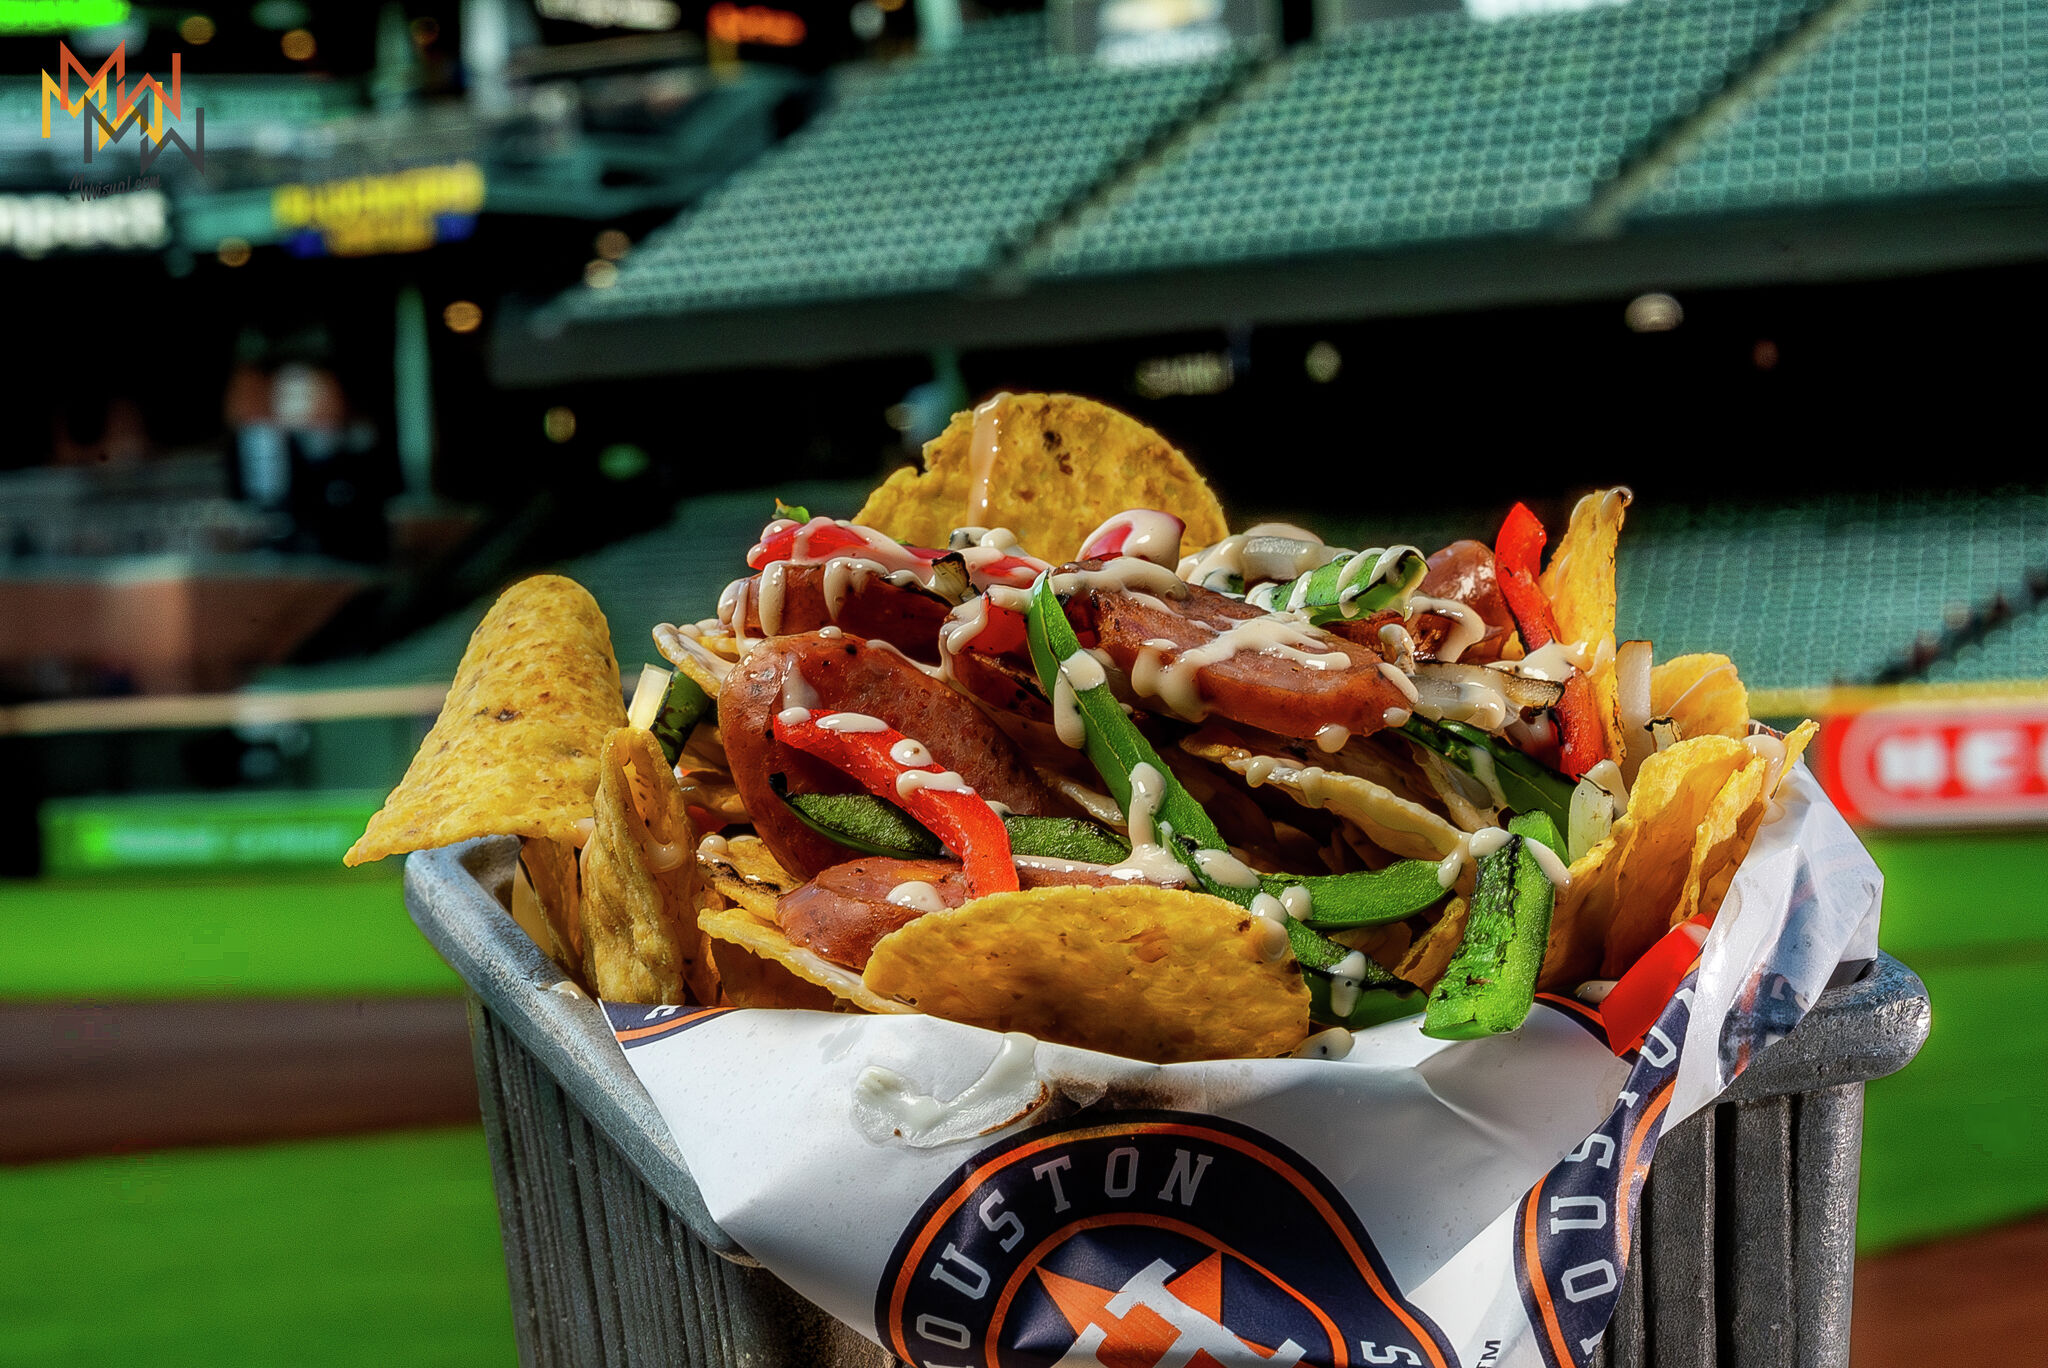 New food items at Minute Maid for weekend games